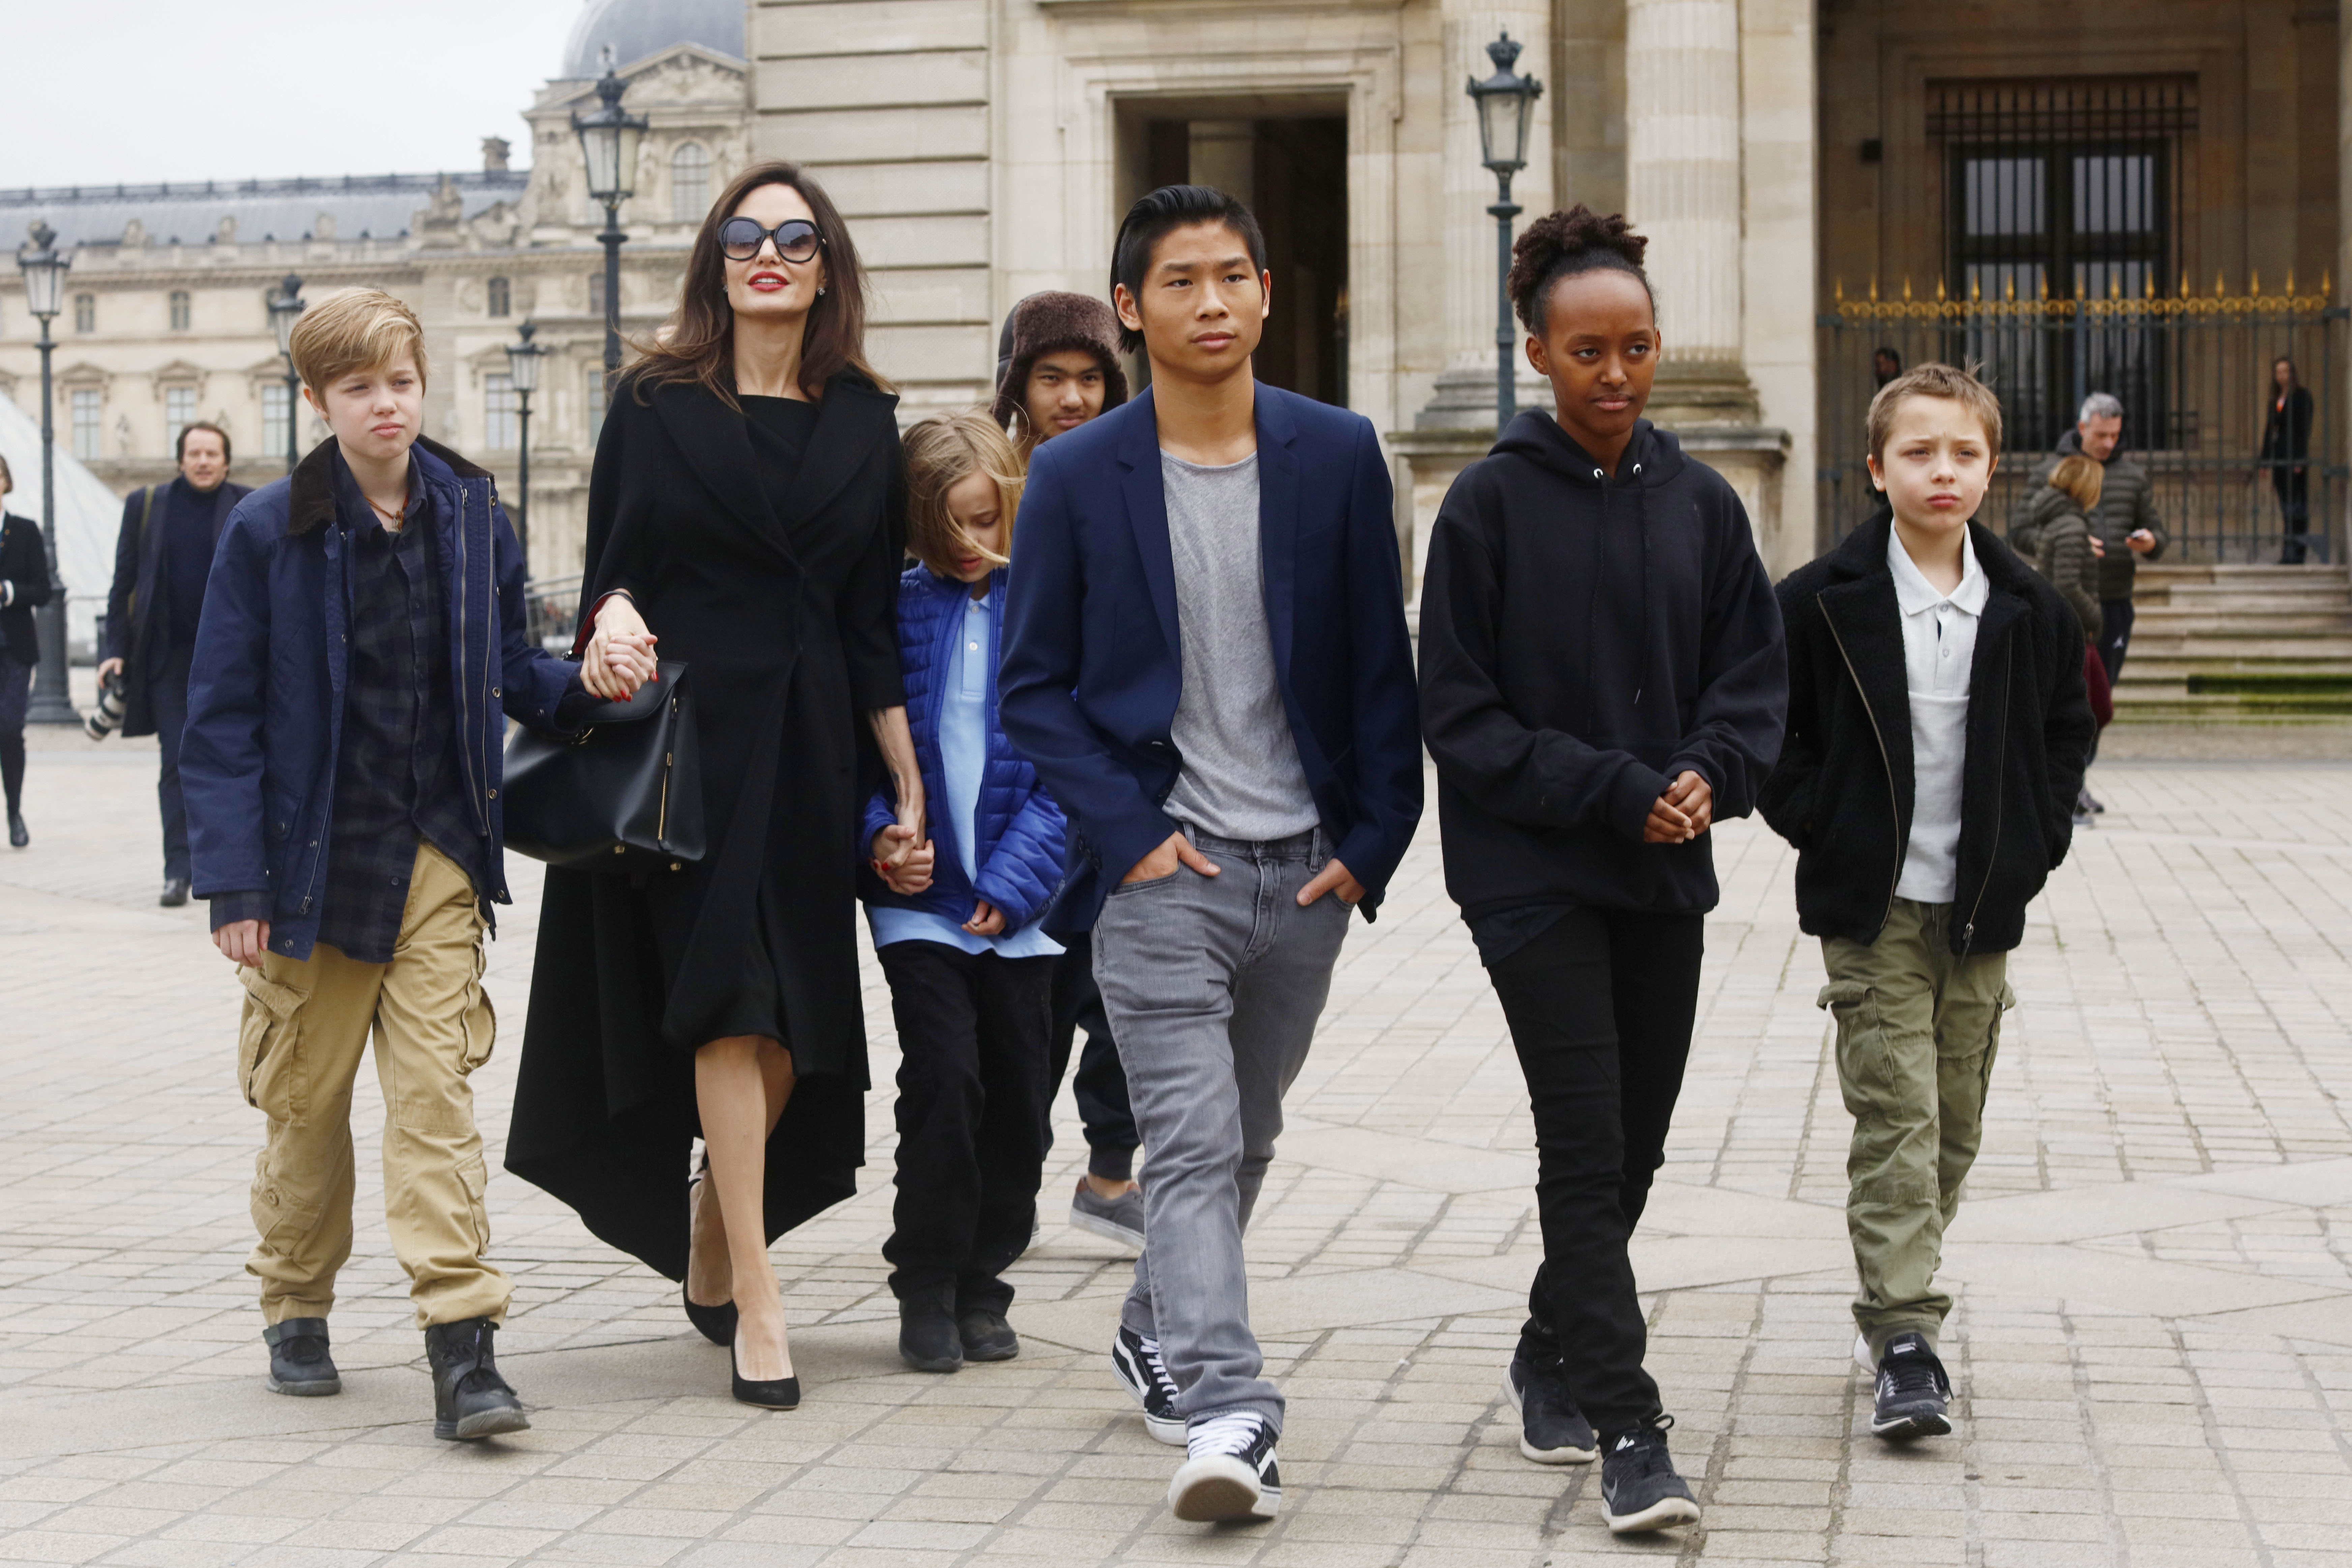 Angelina Jolie with her children Shiloh, Maddox, Vivienne, Pax, Zahara, and Knox visit the Louvre in Paris, France, on January 30, 2017. | Source: Getty Images